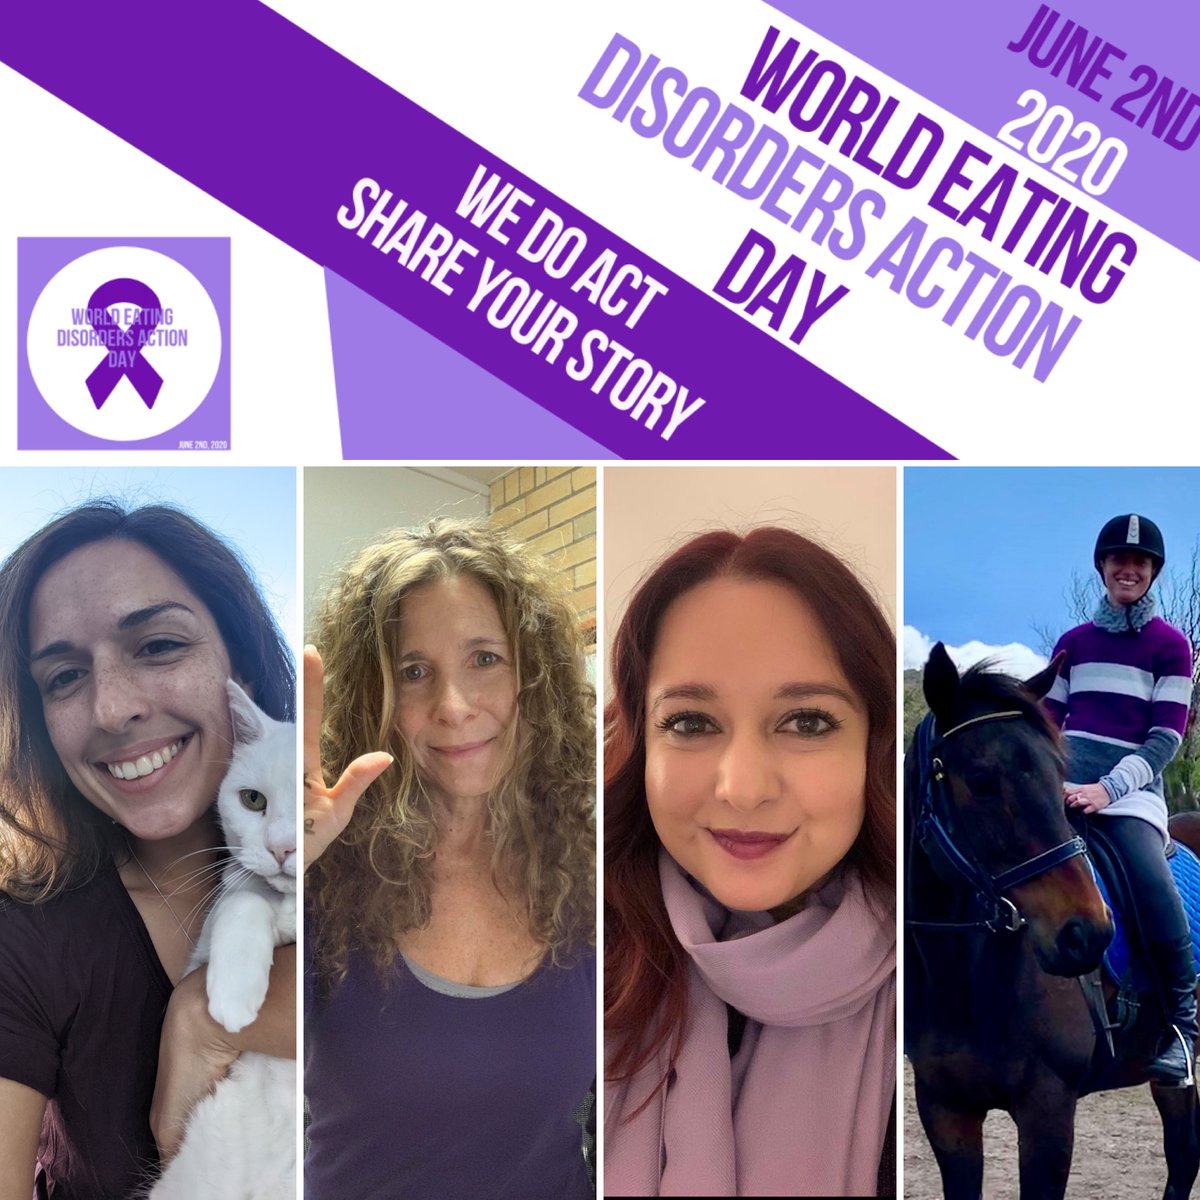 Tomorrow is World Eating Disorder Action Day. #showyourpurple to support the cause! 
#WEDAD #WeDoAct